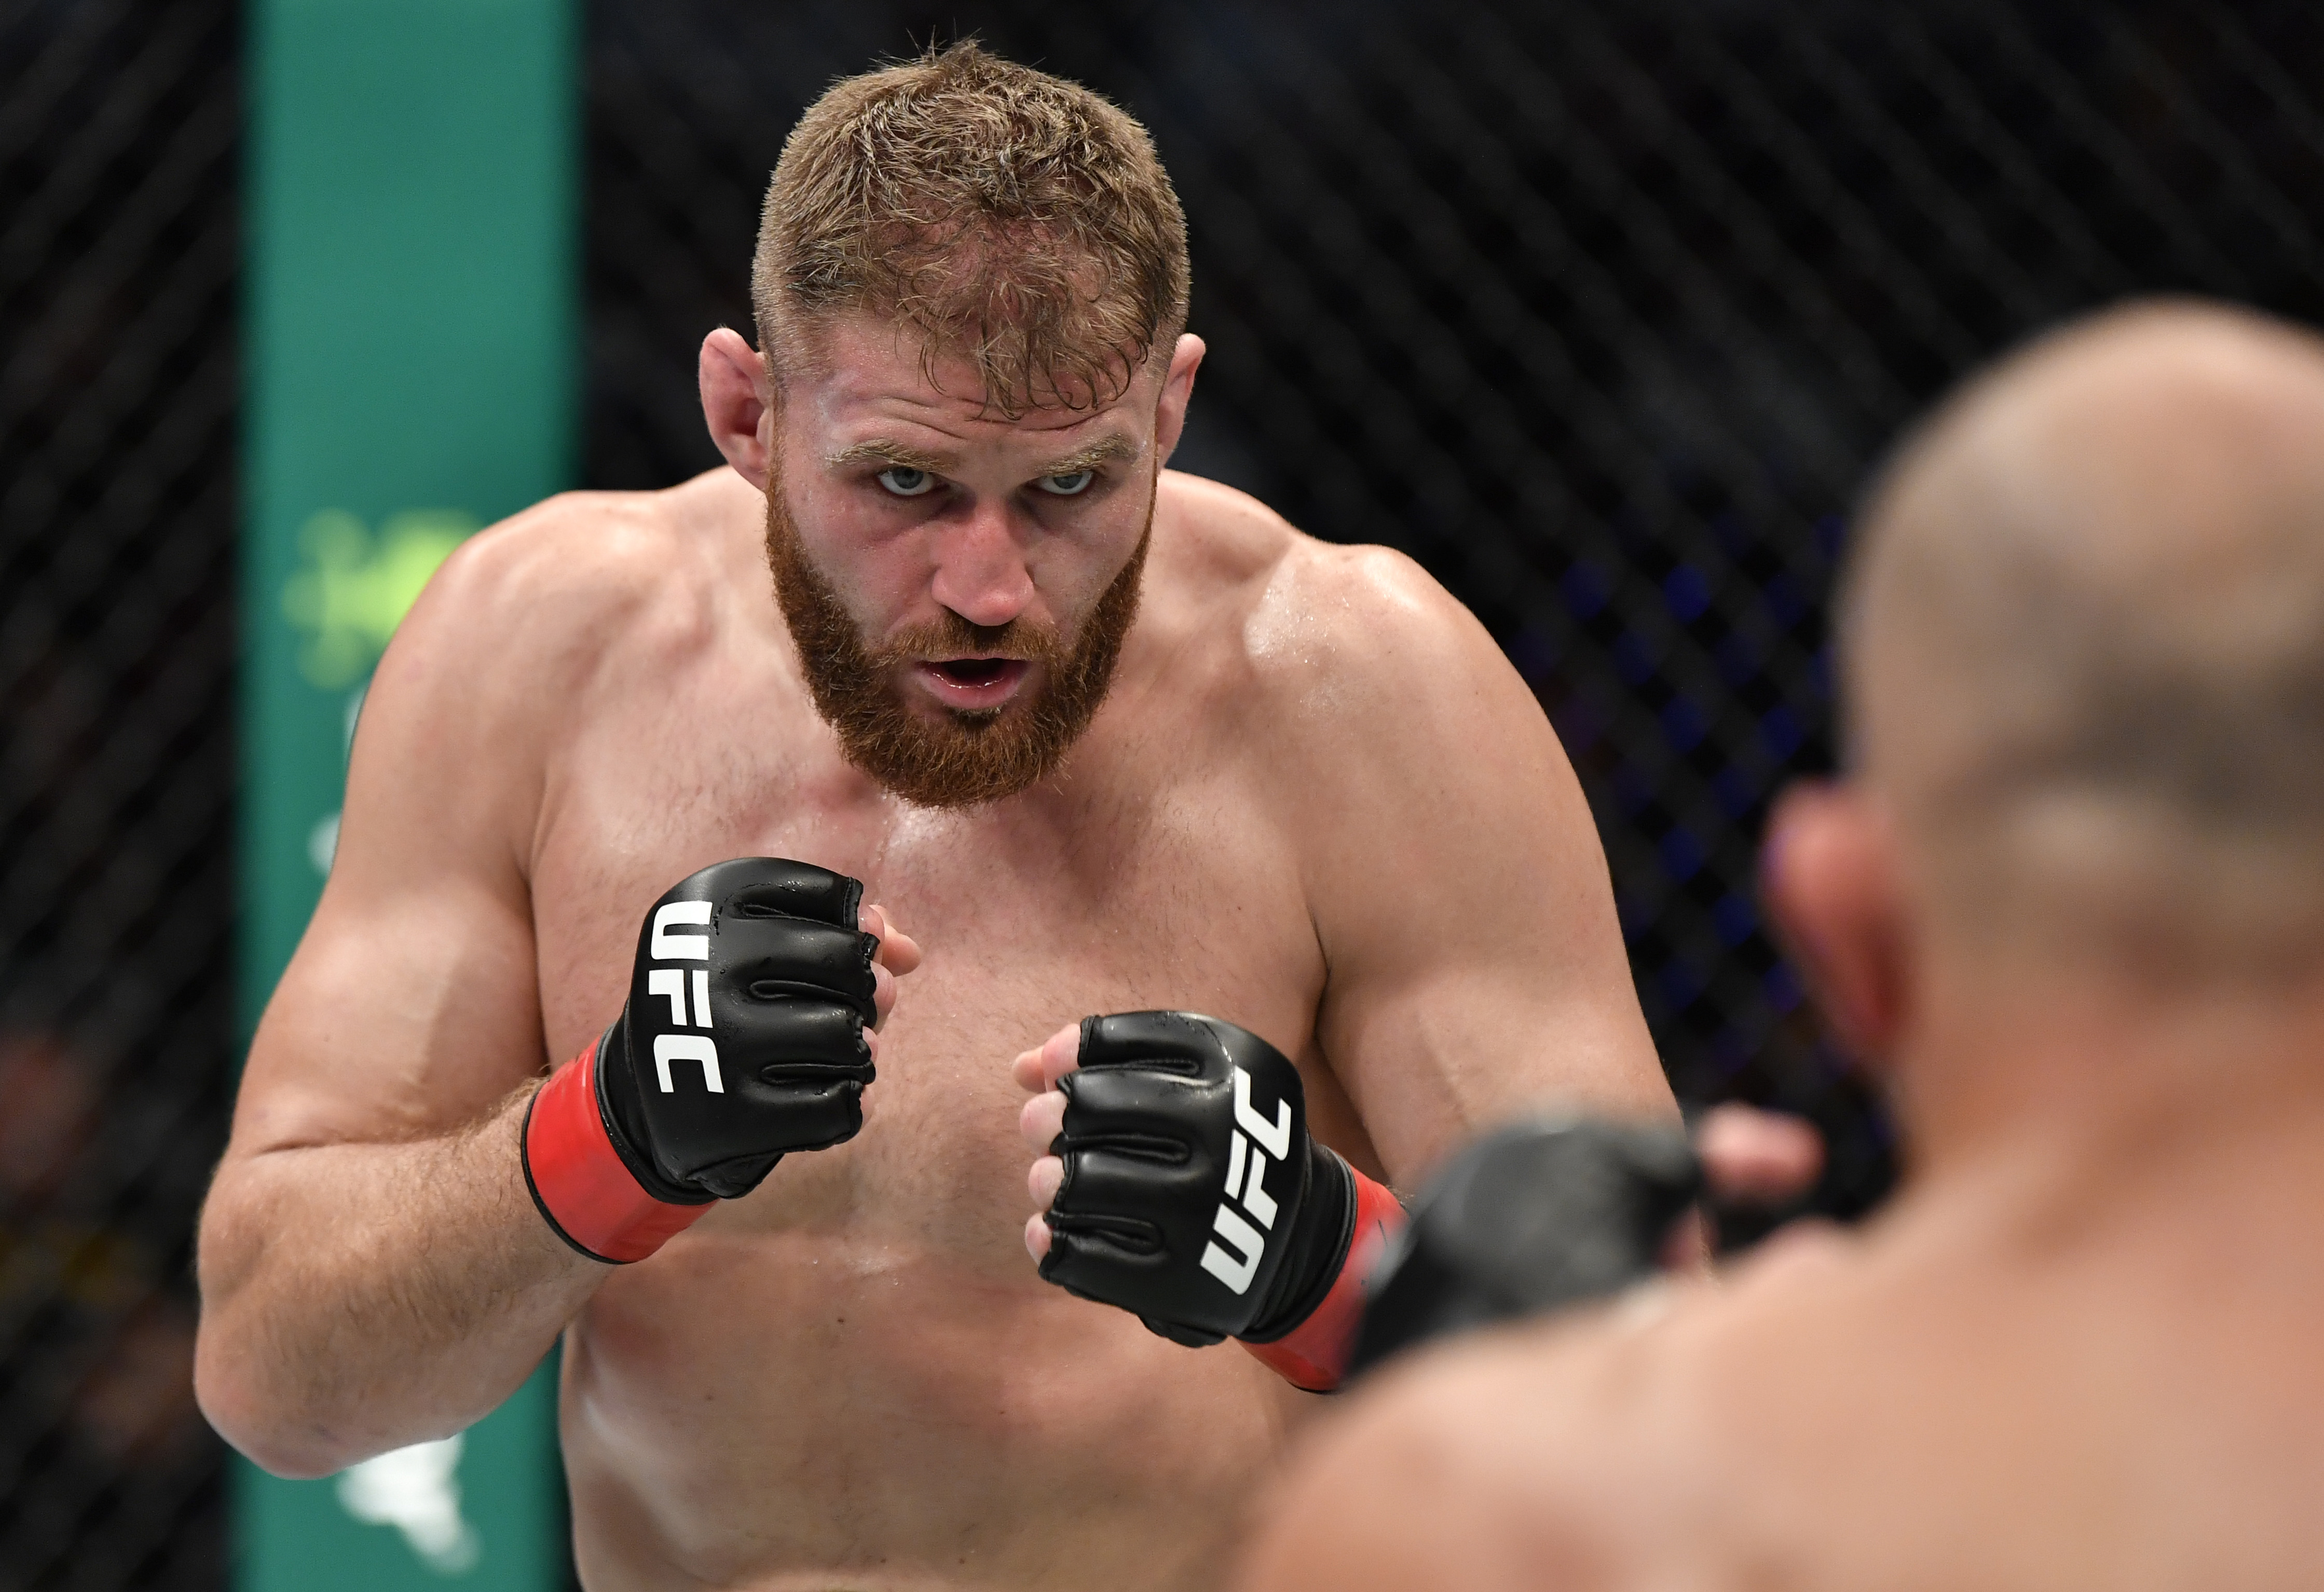 Jan Blachowicz of Poland battles Glover Teixeira of Brazil in the UFC light heavyweight championship fight during the UFC 267 event at Etihad Arena on October 30, 2021 in Yas Island, Abu Dhabi, United Arab Emirates.